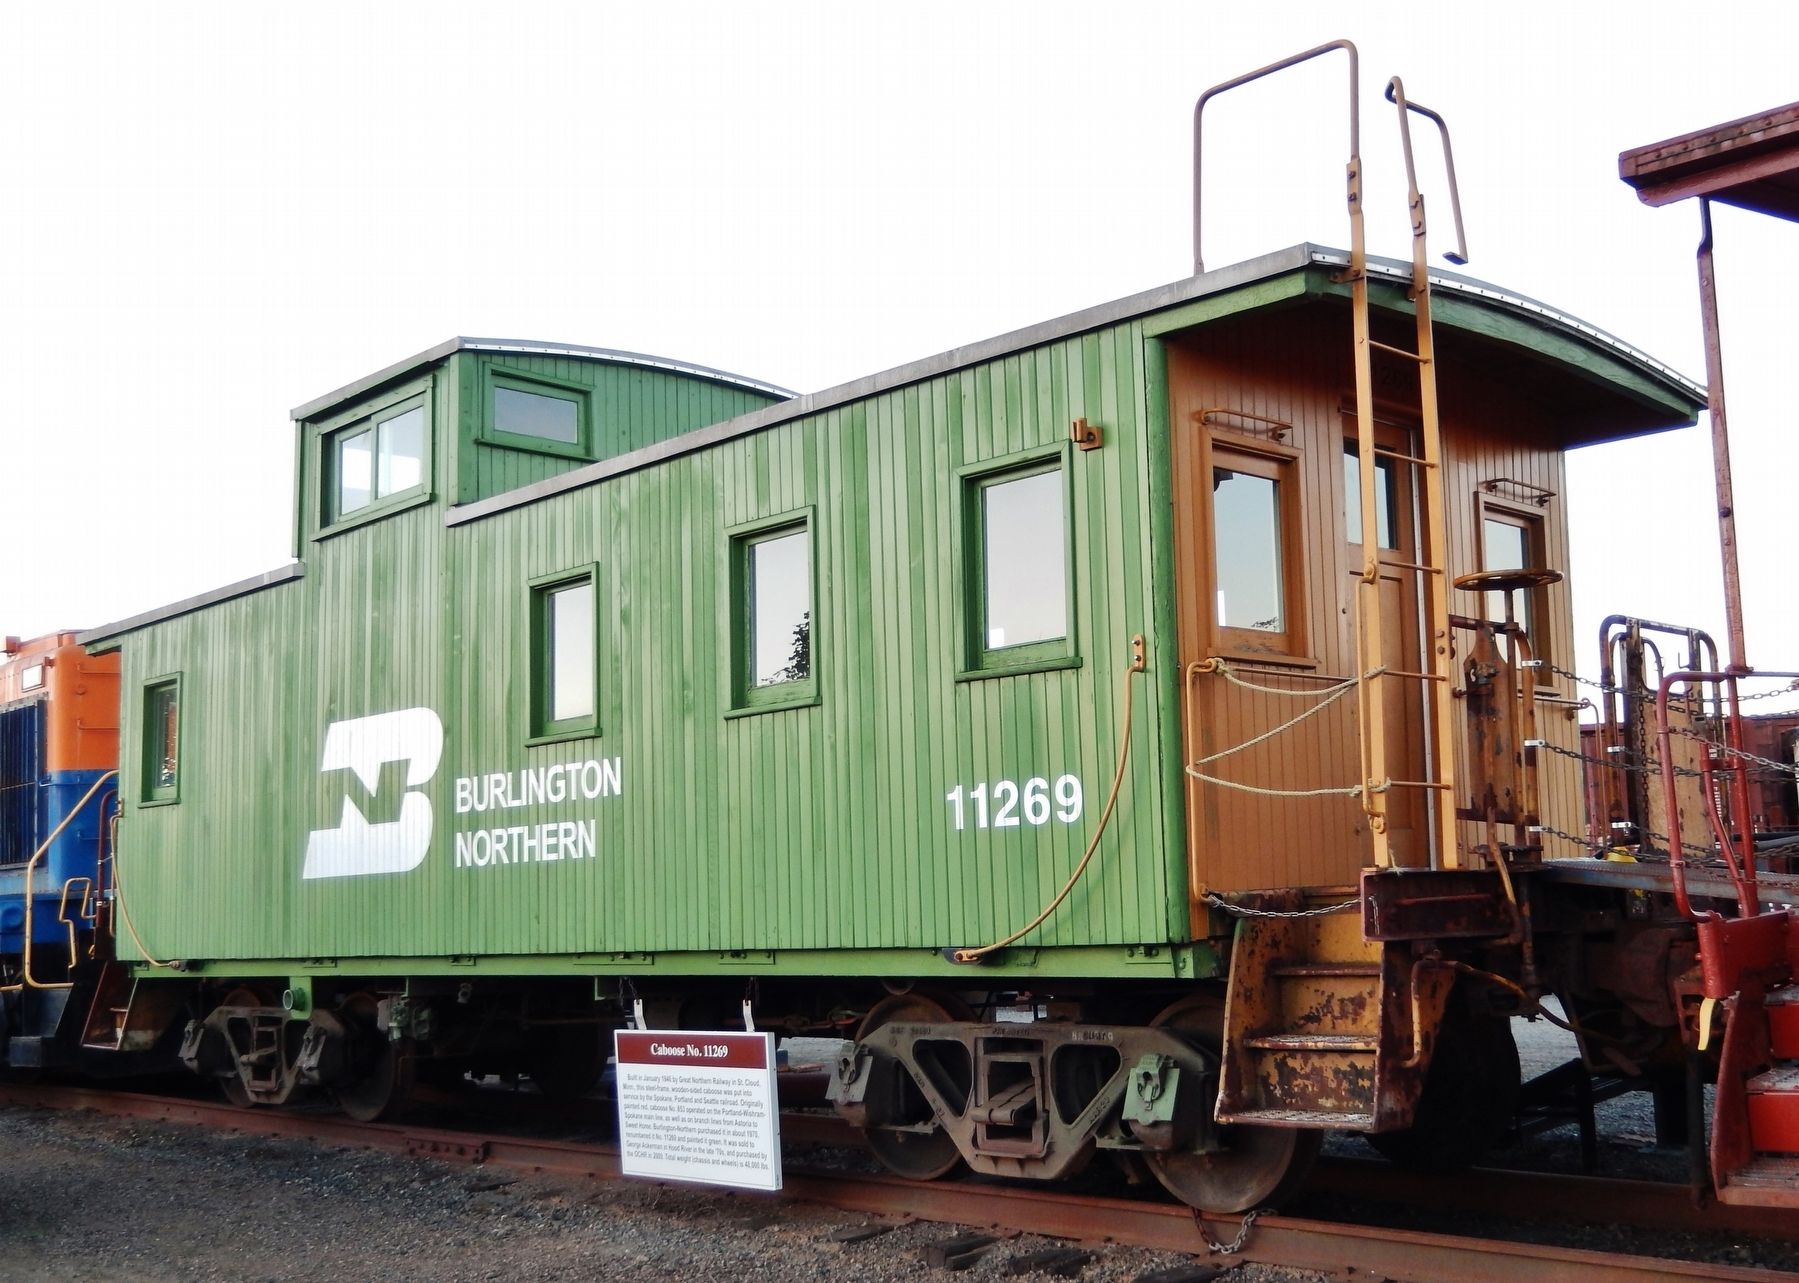 Caboose No. 11269 Marker (<i>wide view showing caboose</i>) image. Click for full size.